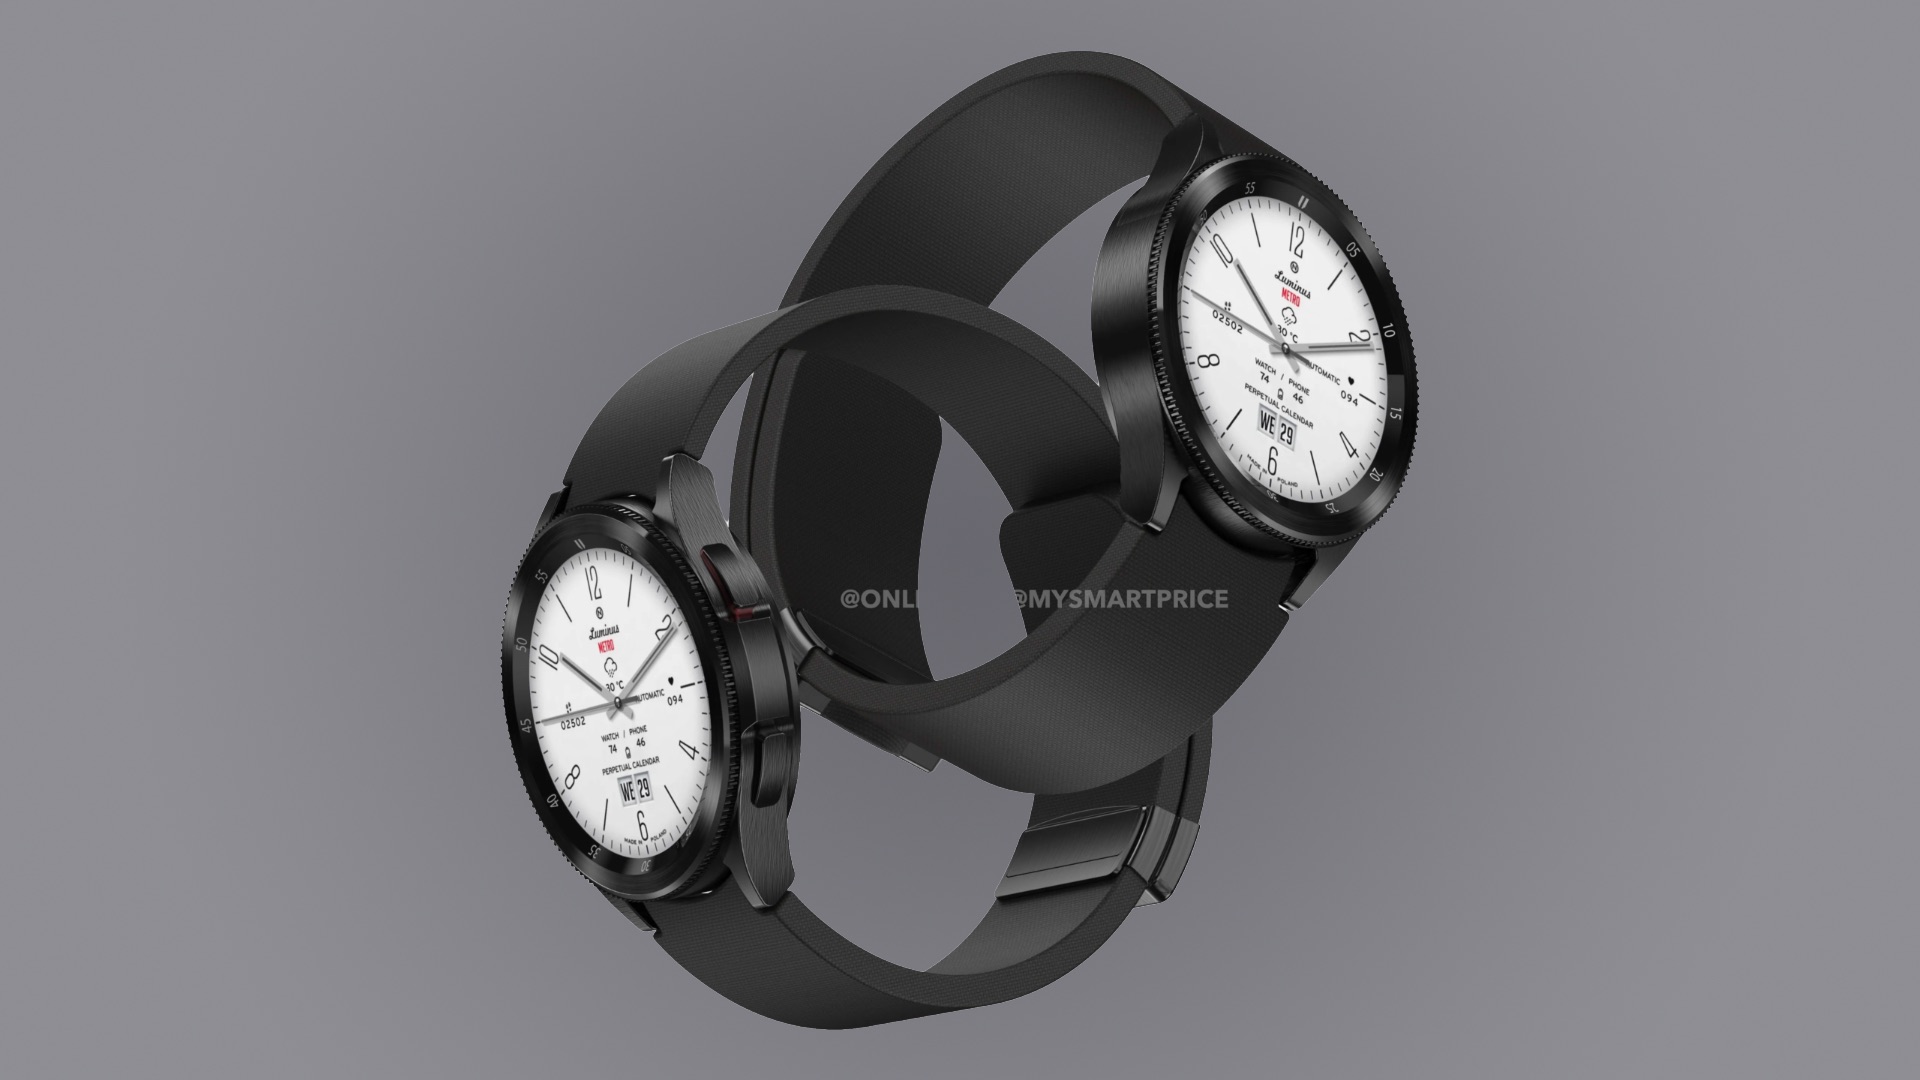 4N Mechanical Digital Watch uses three rotating discs to indicate time.